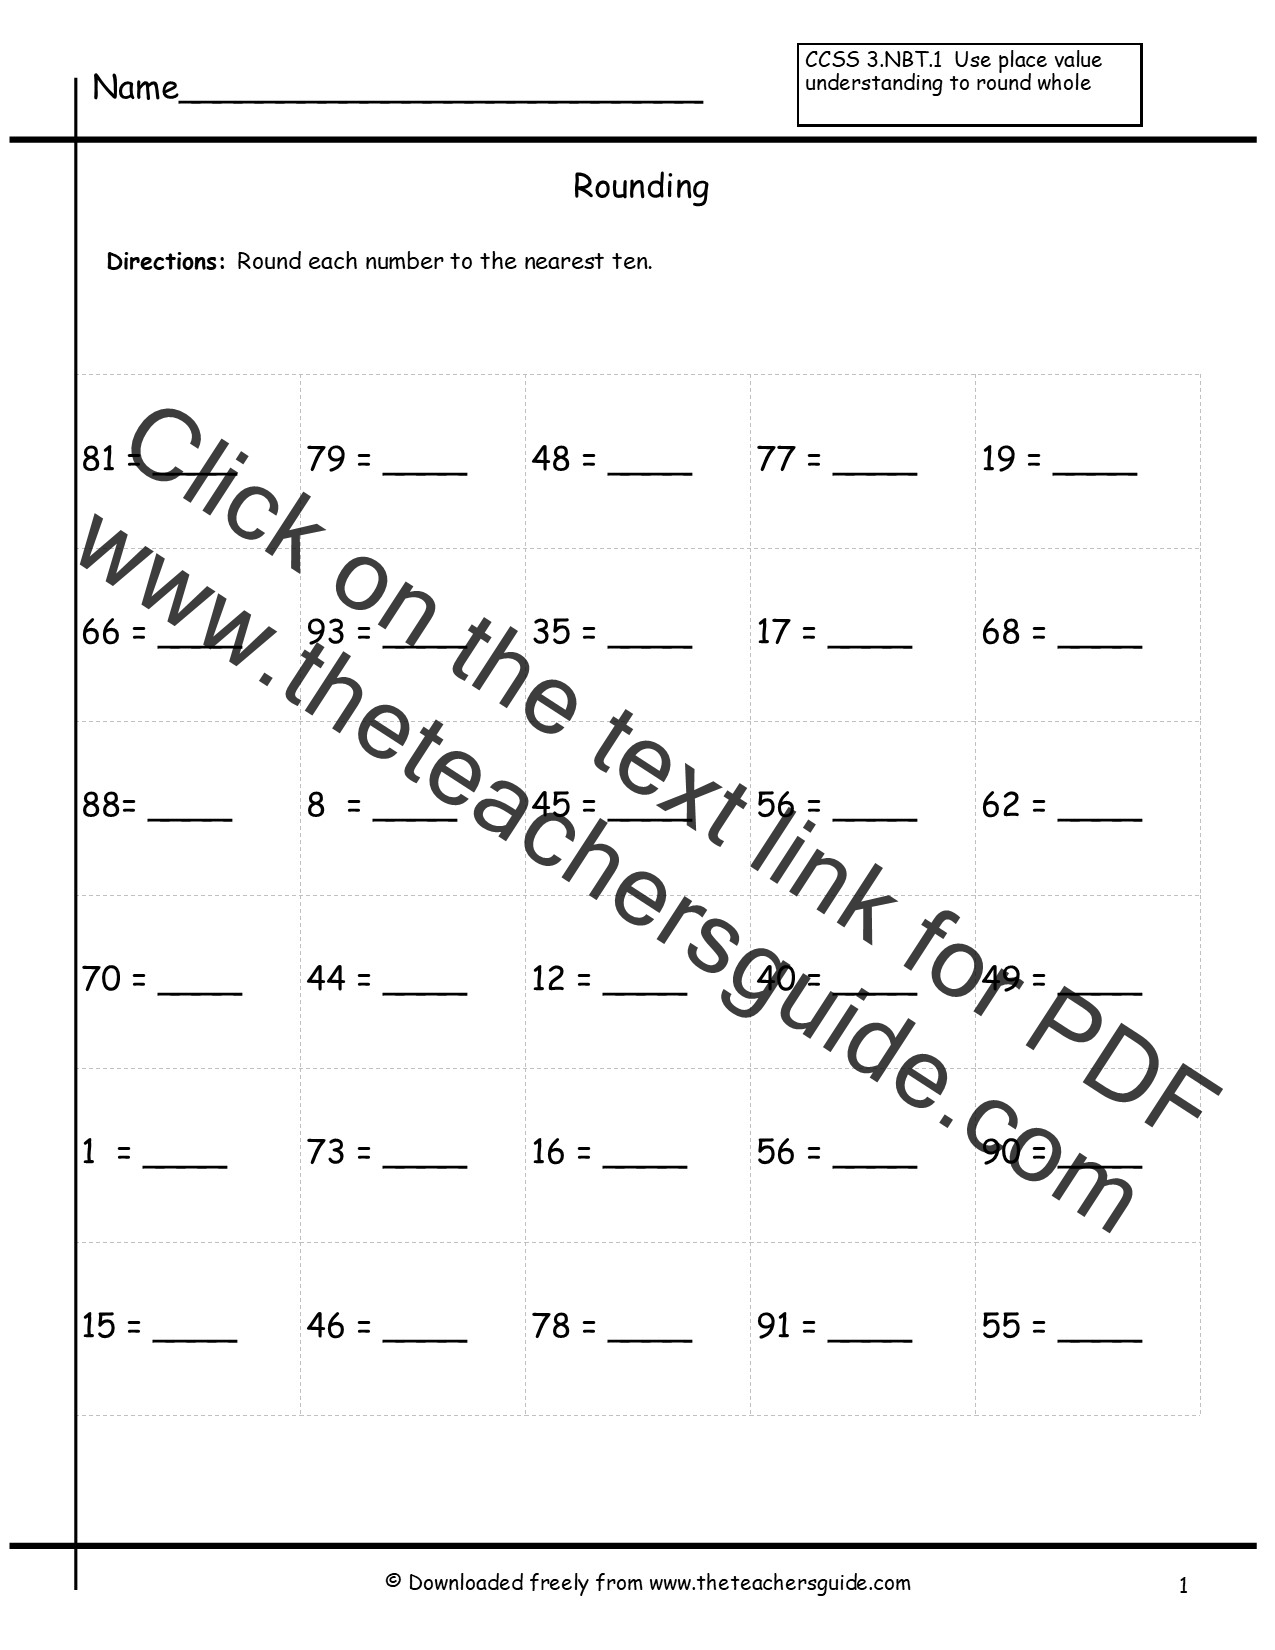 Rounding Whole Numbers Worksheets from The Teacher's Guide